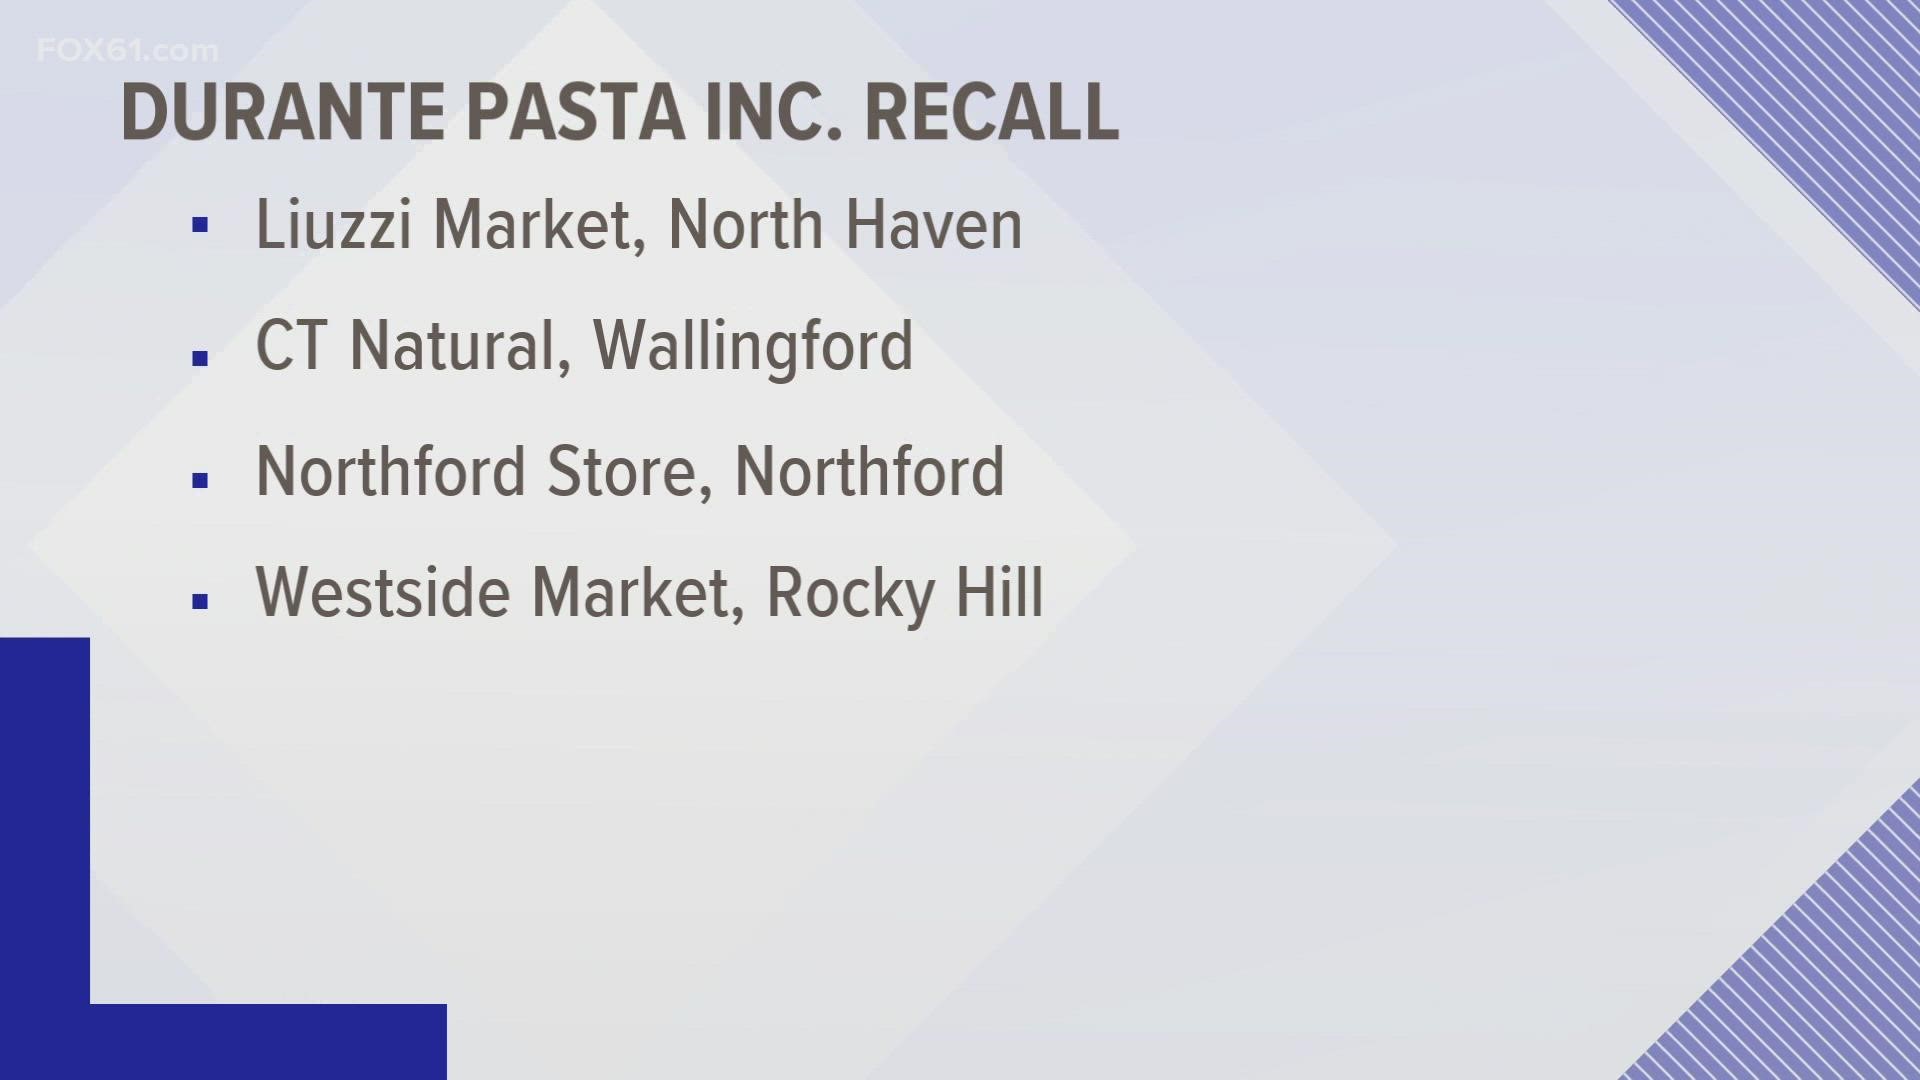 The company said their potato gnocchi may contain milk and sulfite allergens not listed on the packaging.